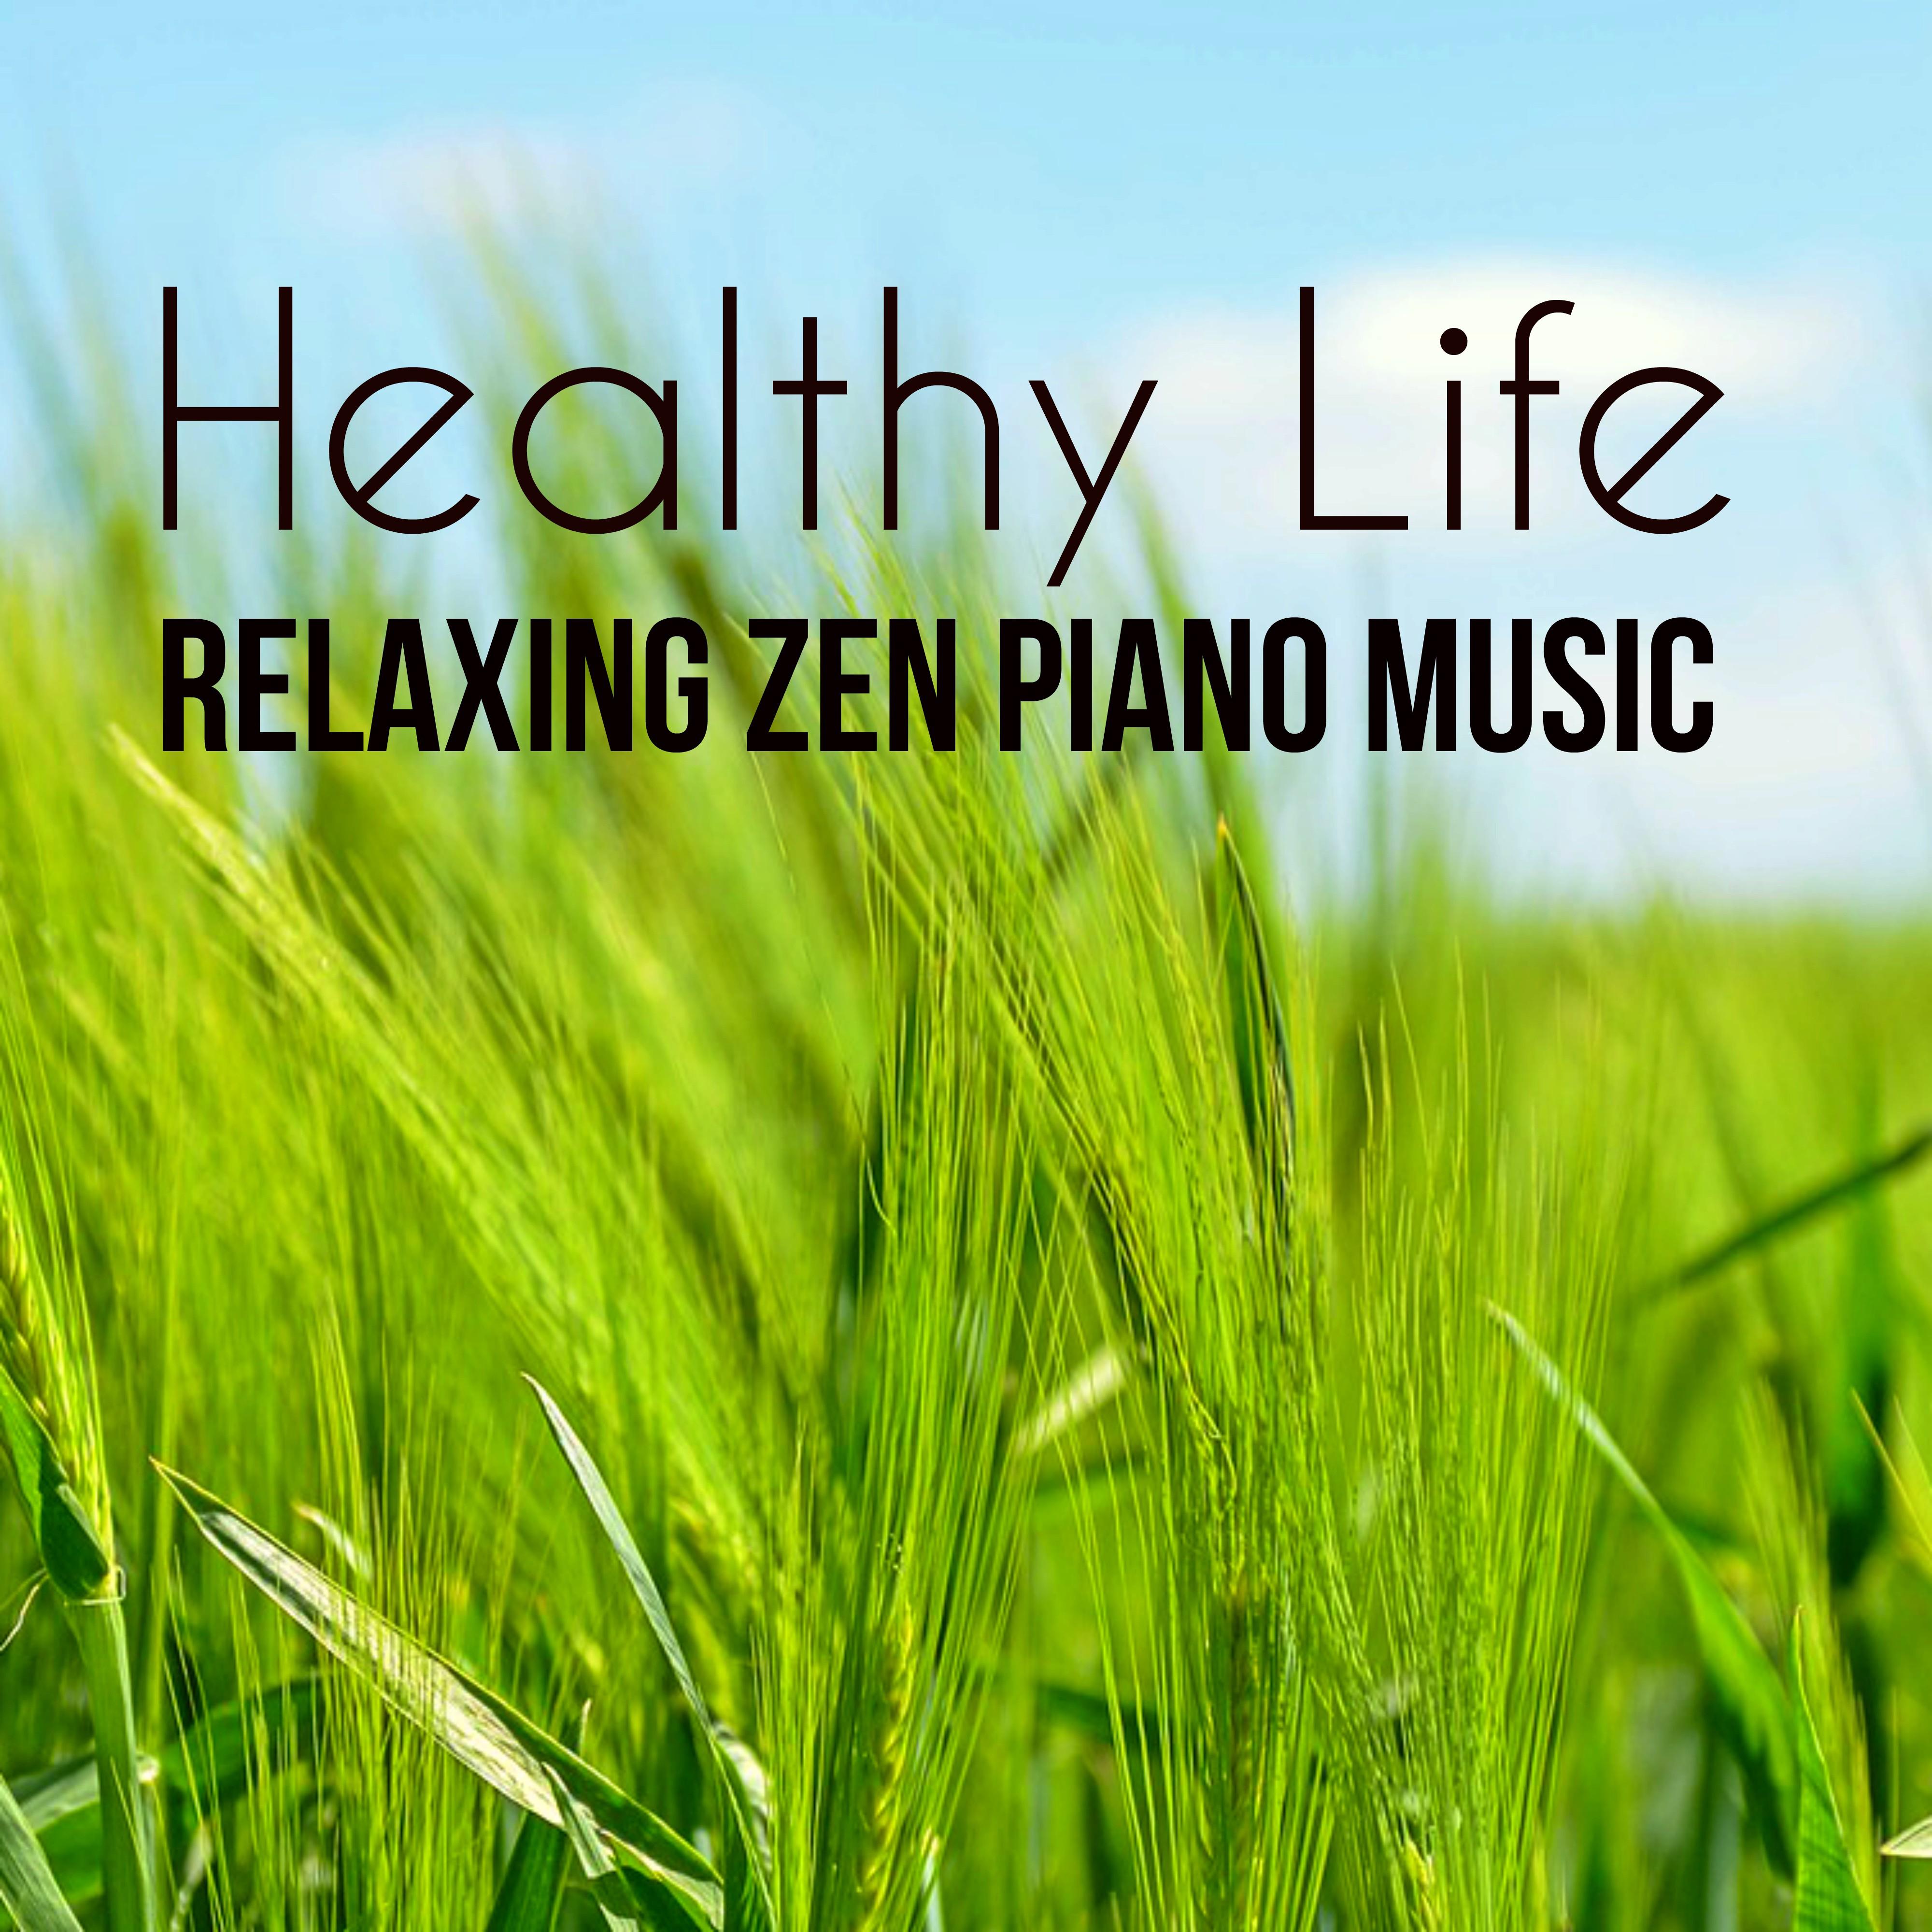 Healthy Life - Relaxing Zen Piano Music for Bio Training Day Spa Energy Balancing with New Age Calming Sleep Sounds